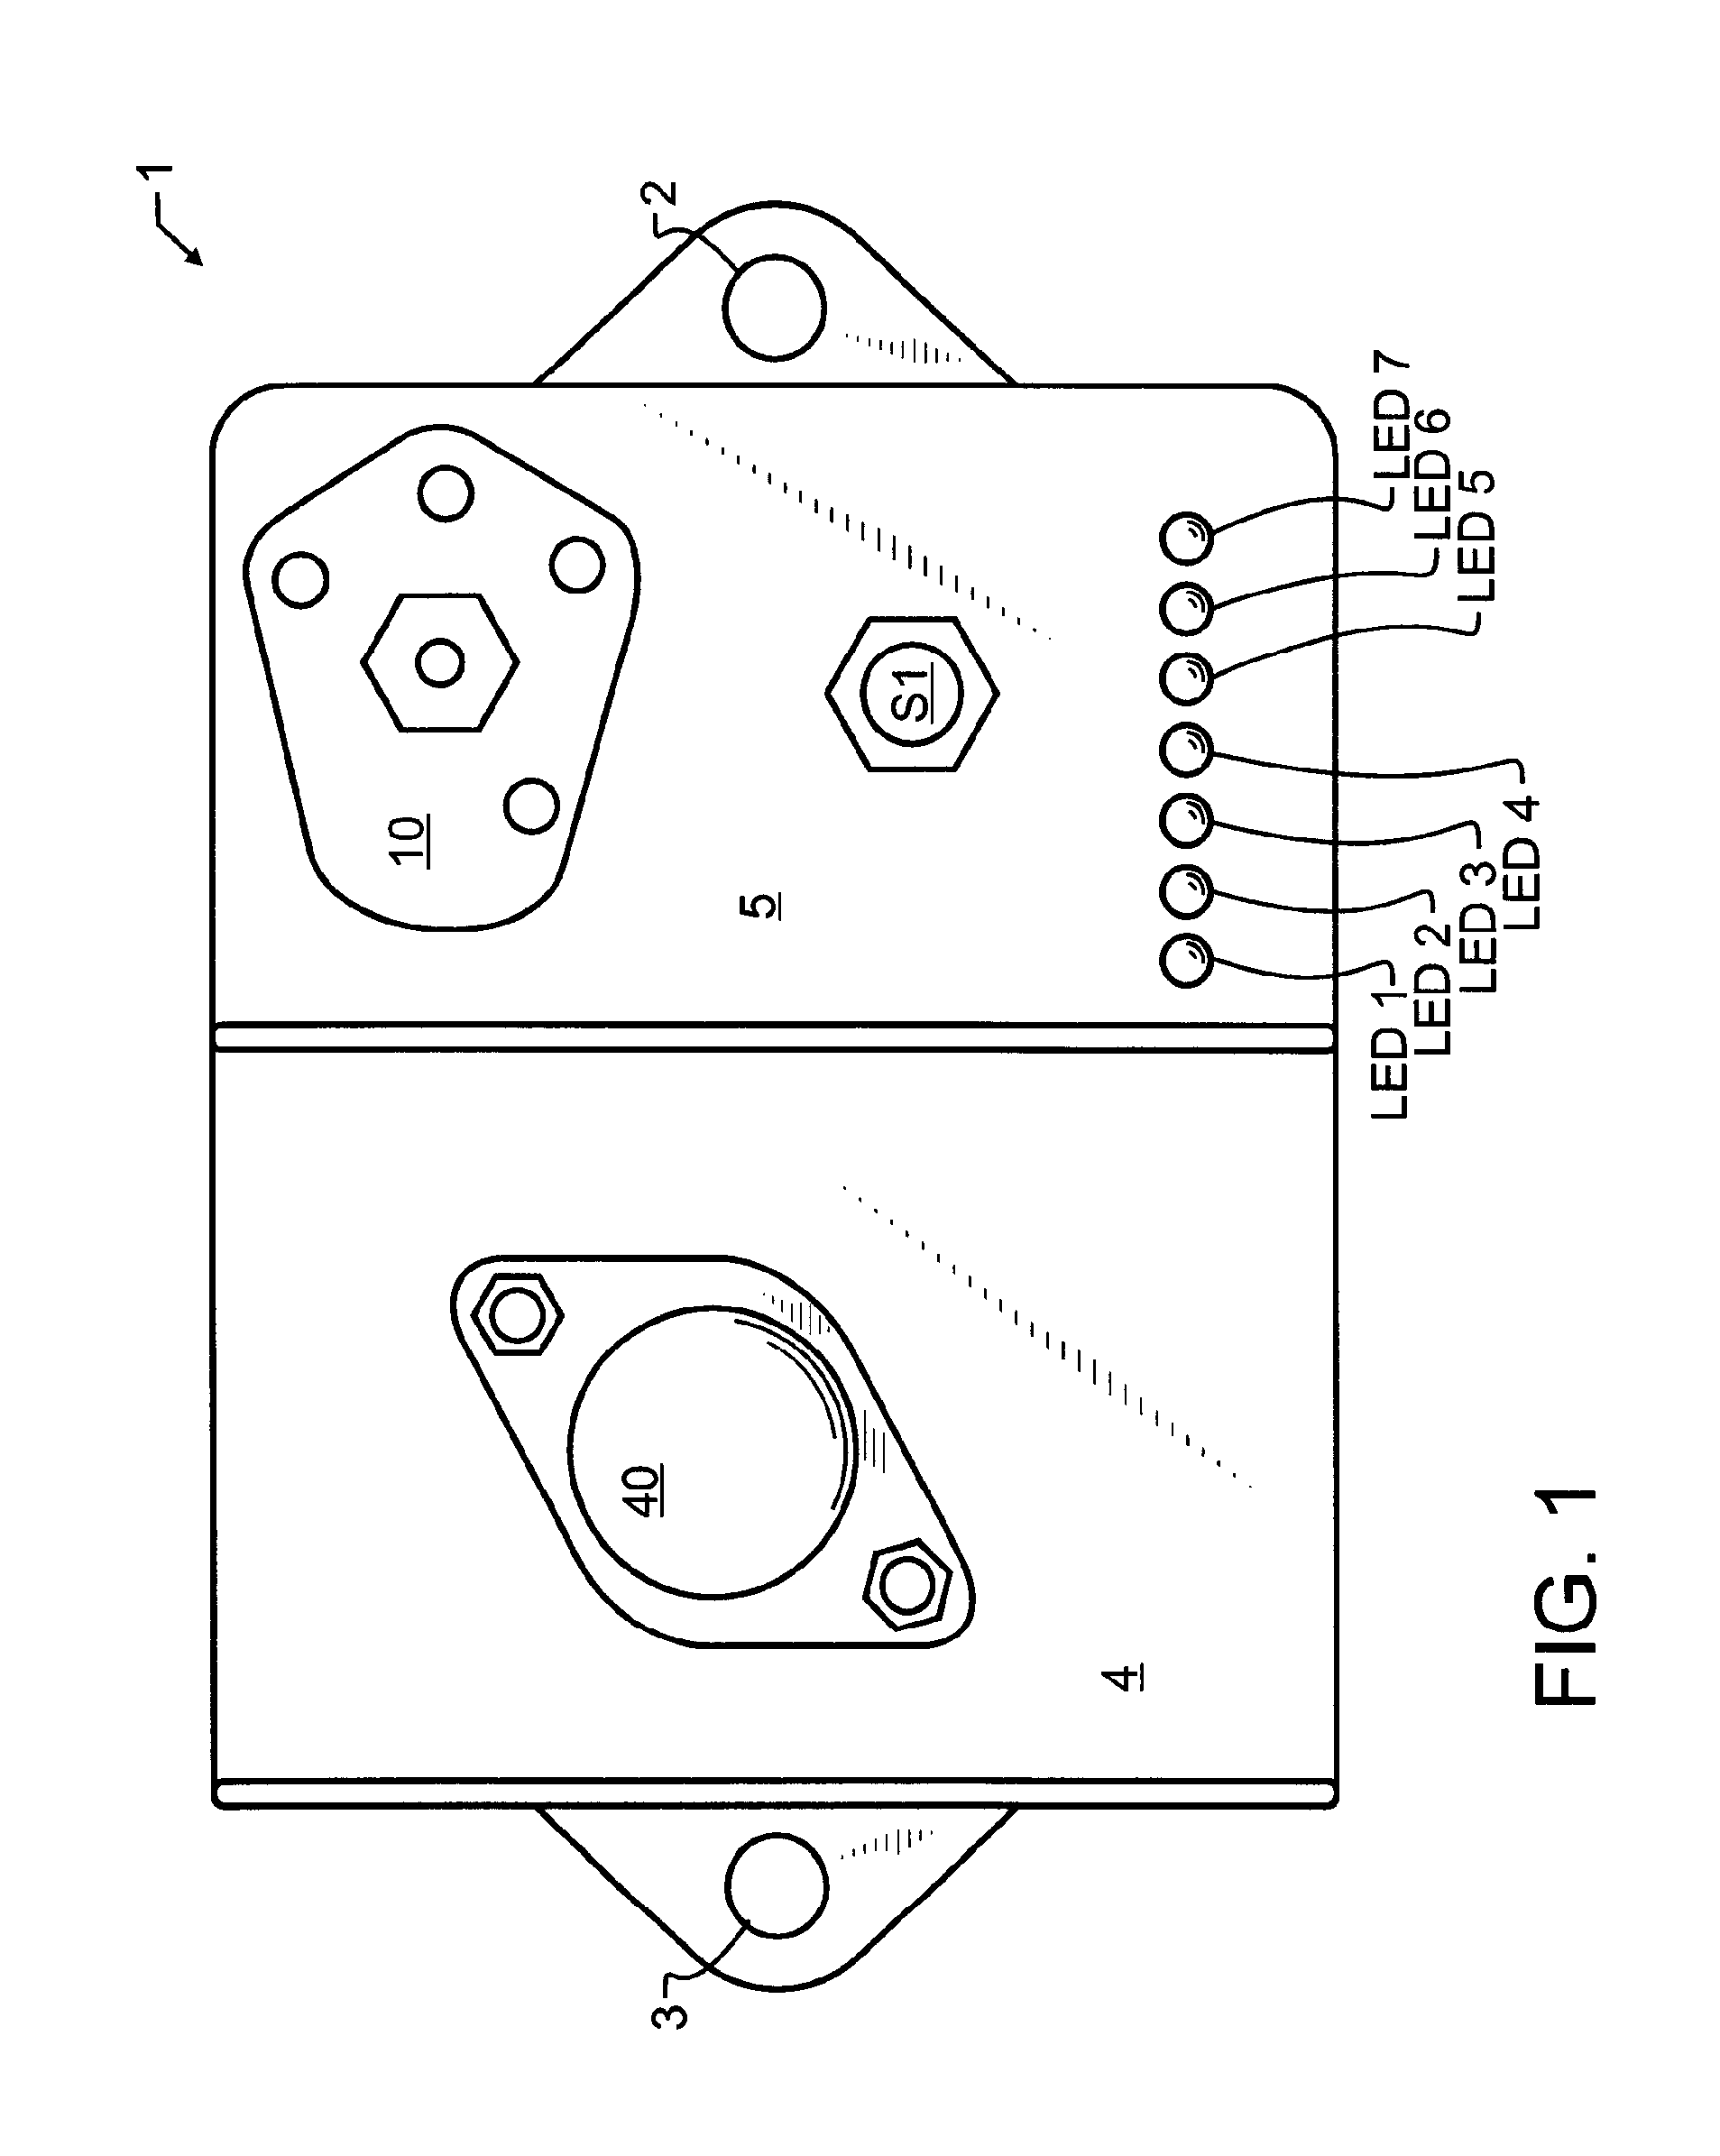 Electronic ignition module with rev limiting